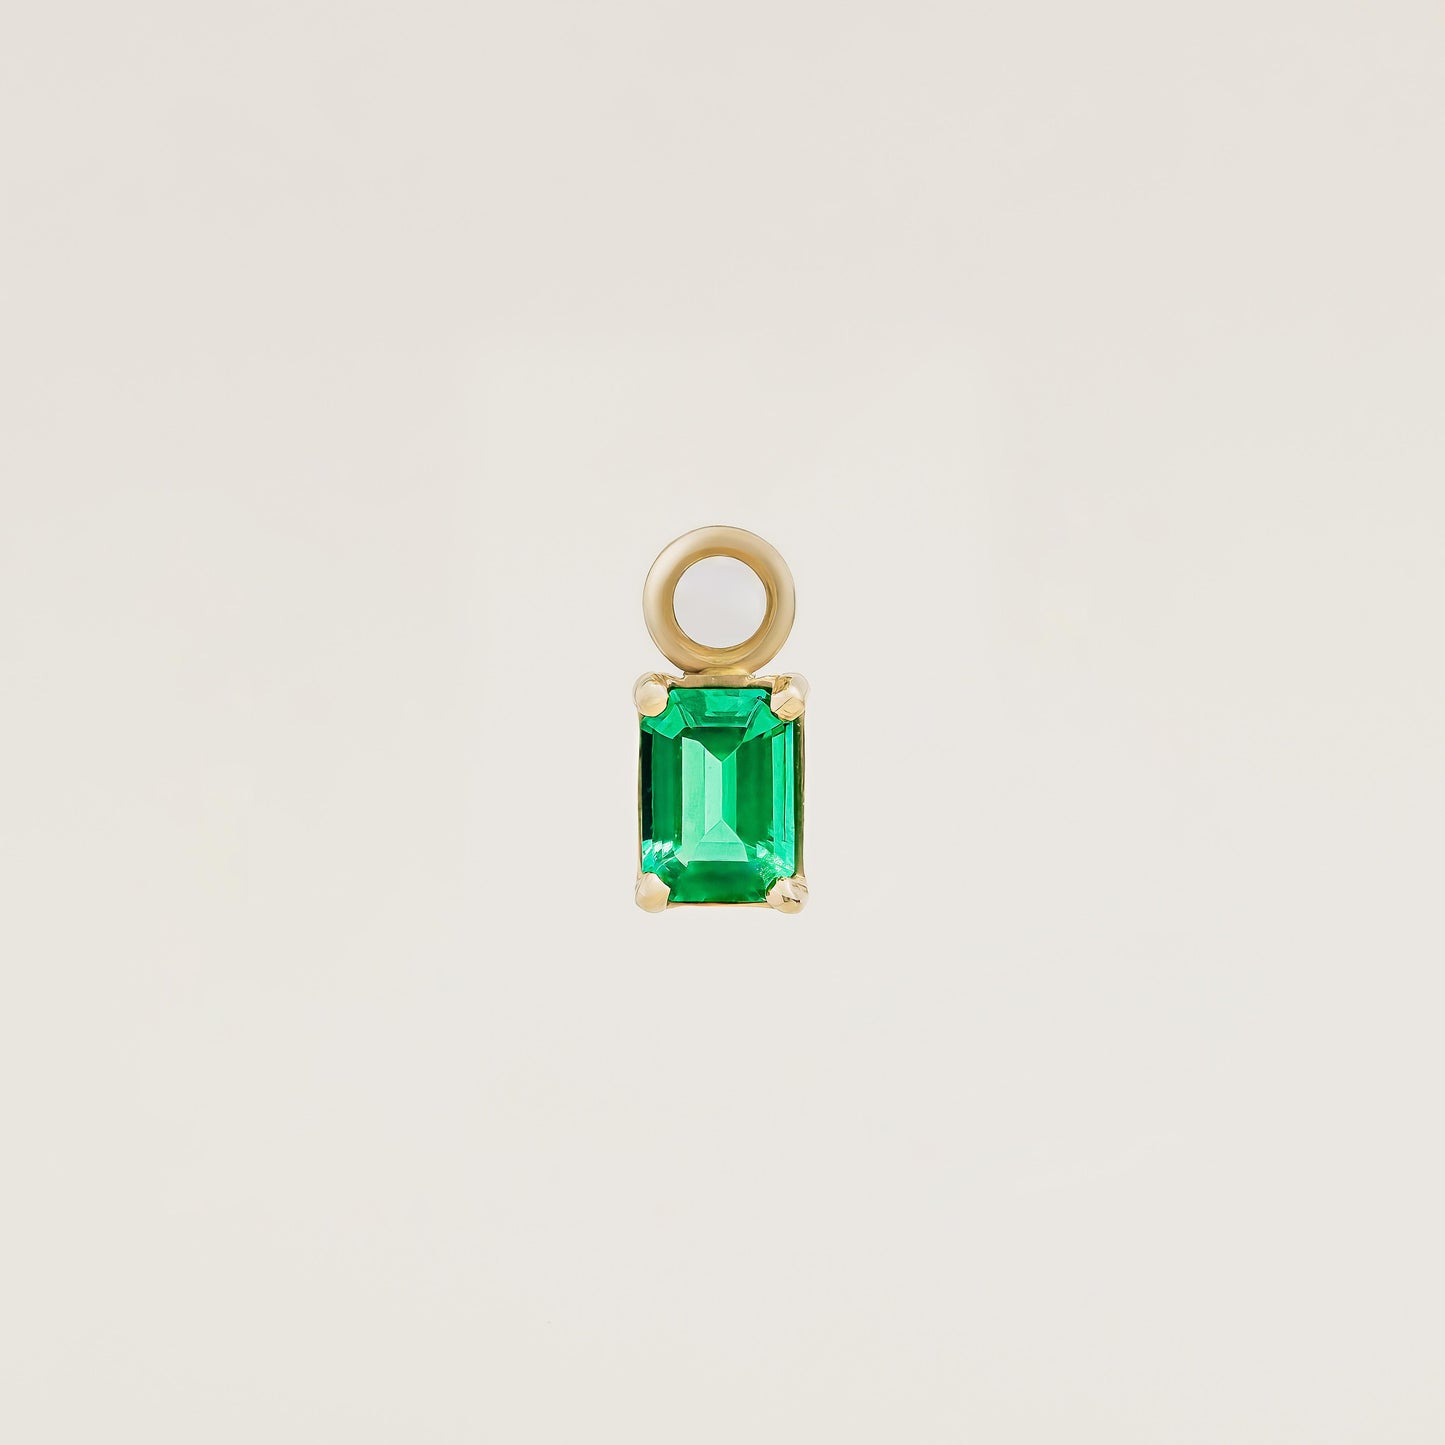 Large Emerald Charm for Hoops